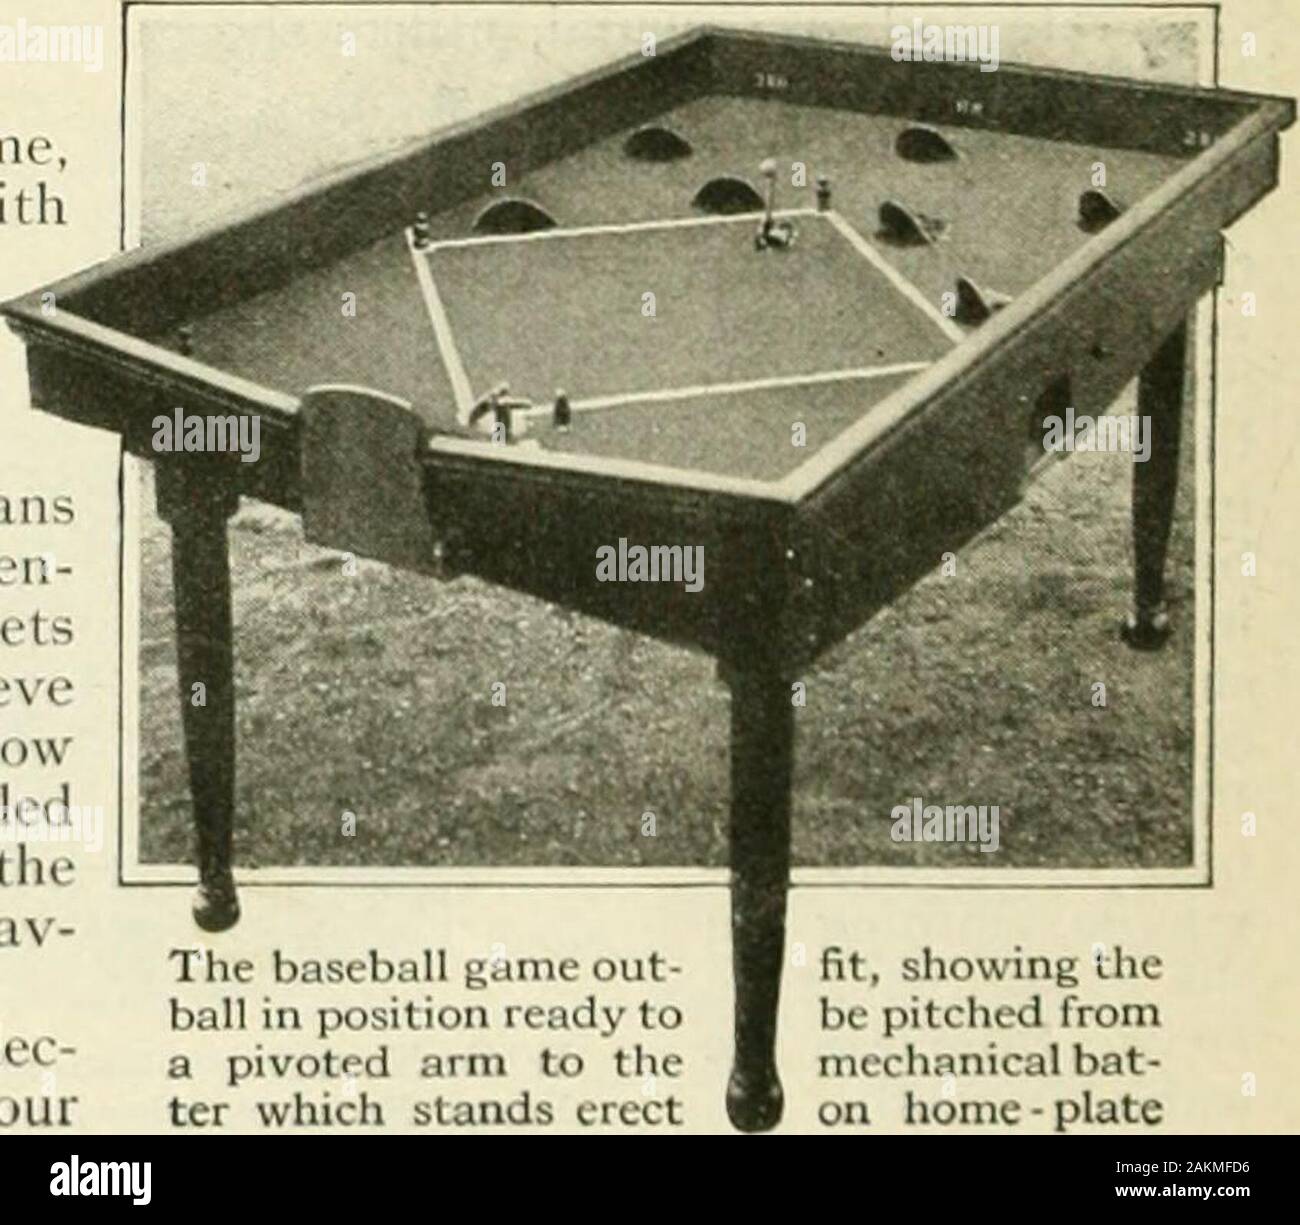 Popular science monthly . layercan sometimes lift a high one tocenter field or send a swift one bowlingtoward the shortstop position with suchspeed that it strikes the catching-hoodwith a resounding thud. This is onegame where foul balls are unheard of.If the batted ball flies off at an angle thesides of the apparatus are high enoughto preent it leaving the board. Another Baseball Game inDisguise IF baseball, the great American game,fails to live up to its reputation withthe coming generation it will at leastnot sink into obliion. The large andaried collection of games simulatingit  ill s Stock Photo